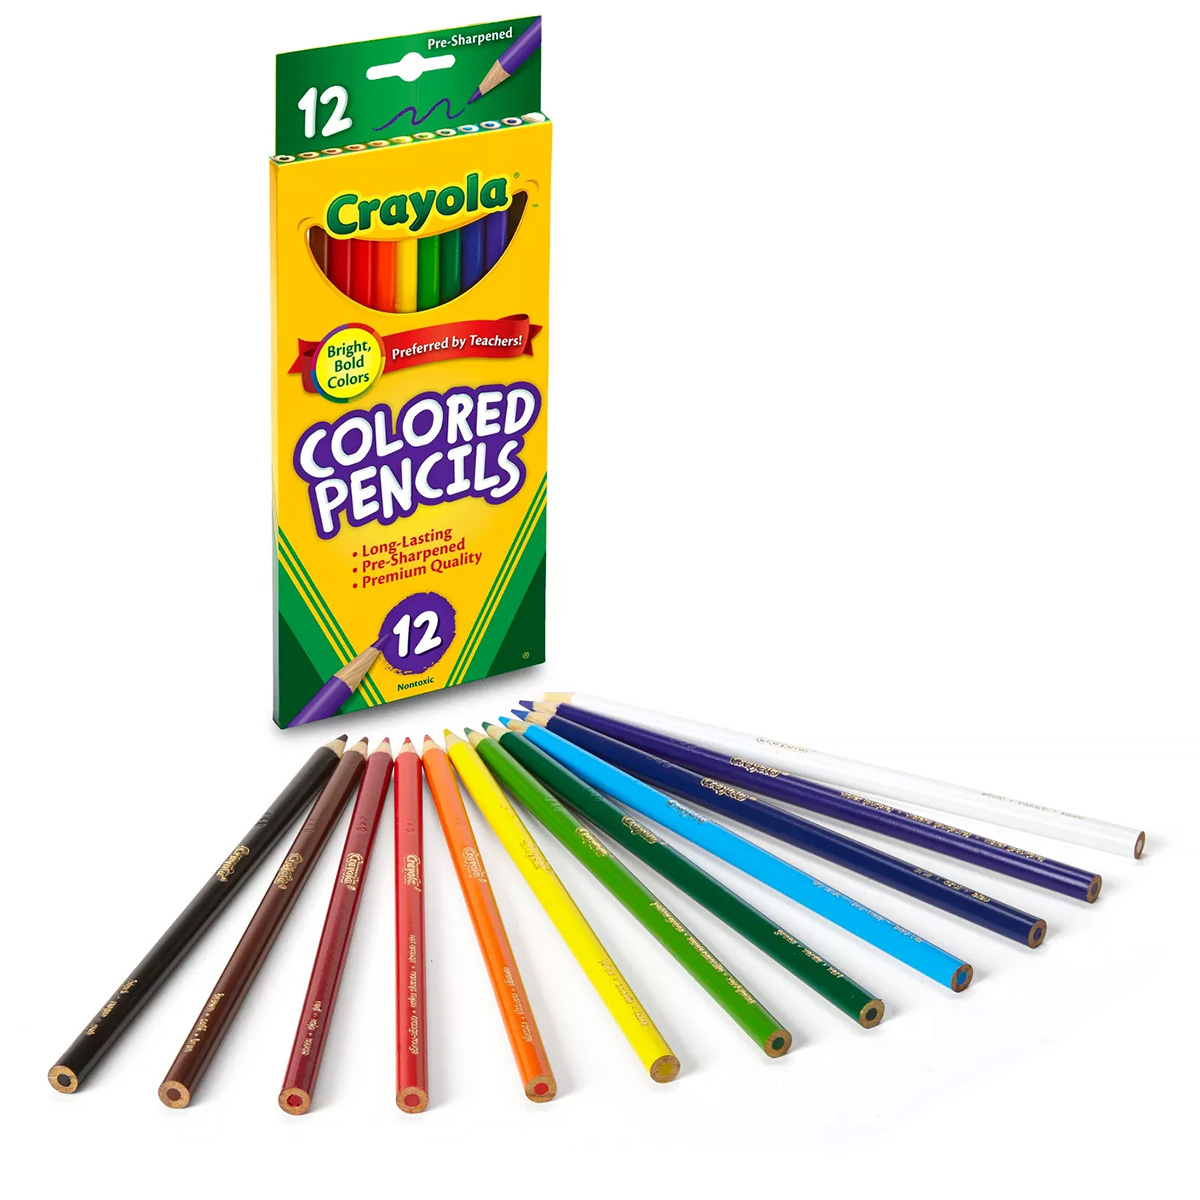 Crayola Colored Pencils 12 set | The Ink Stone